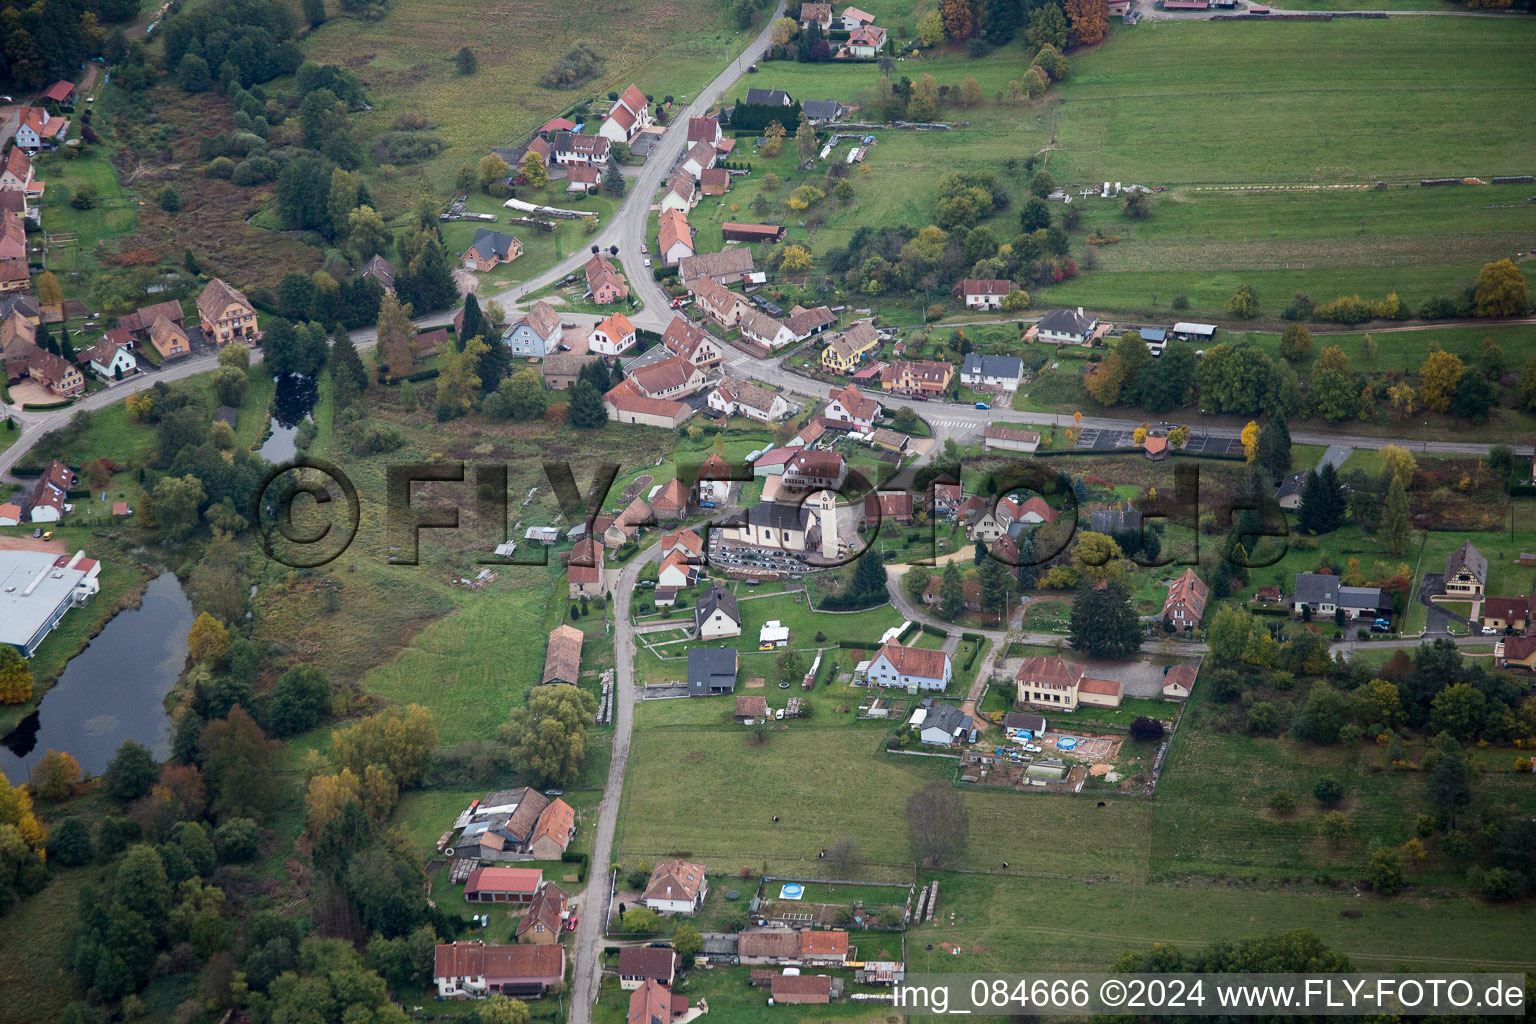 Drone image of Dambach in the state Bas-Rhin, France